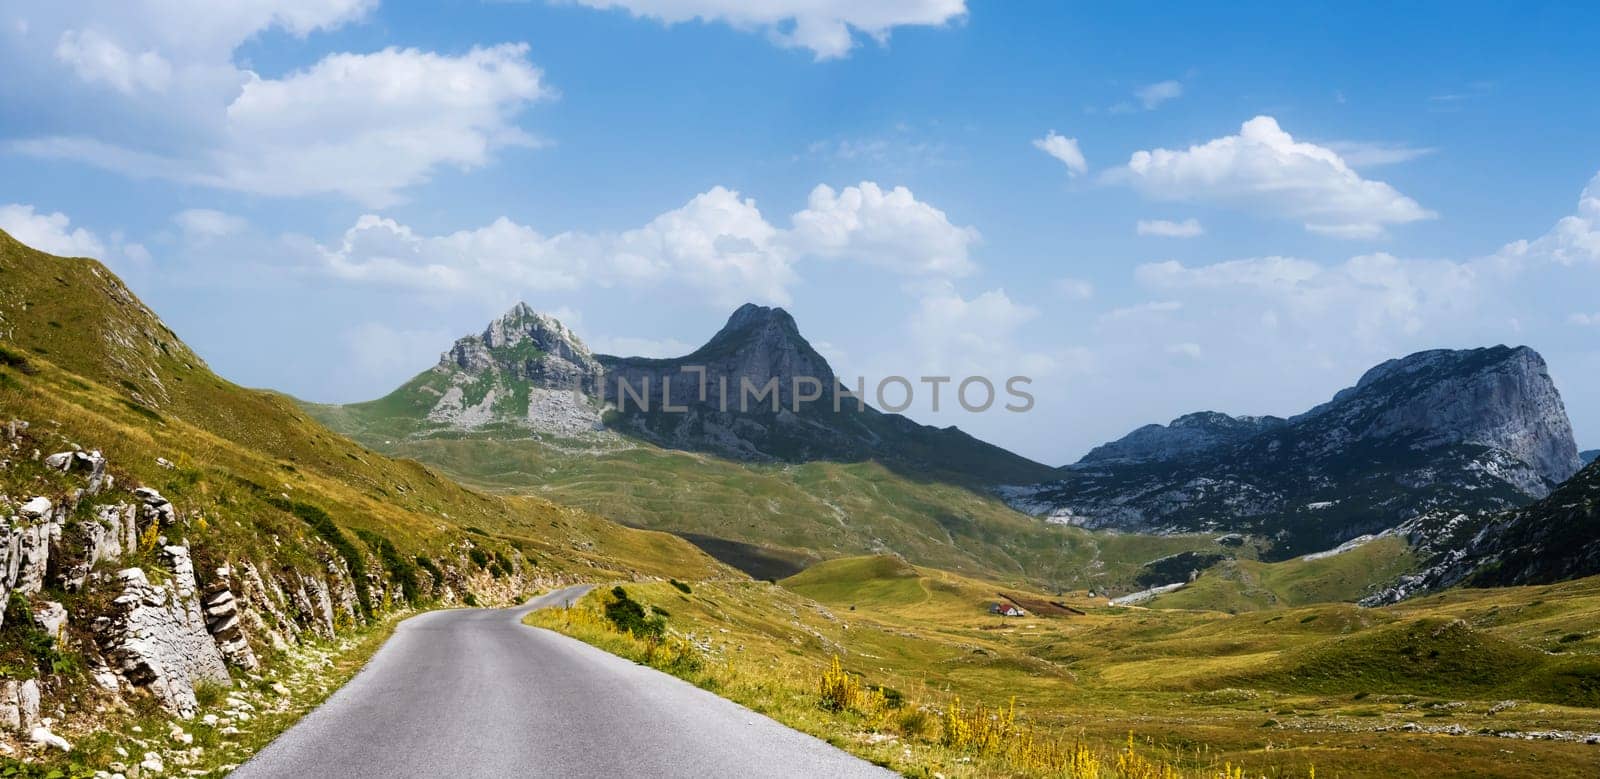 Road with mountains view in National park Durmitor in Montenegro. Amazing balkan nature and hills in sunny day with blue sky